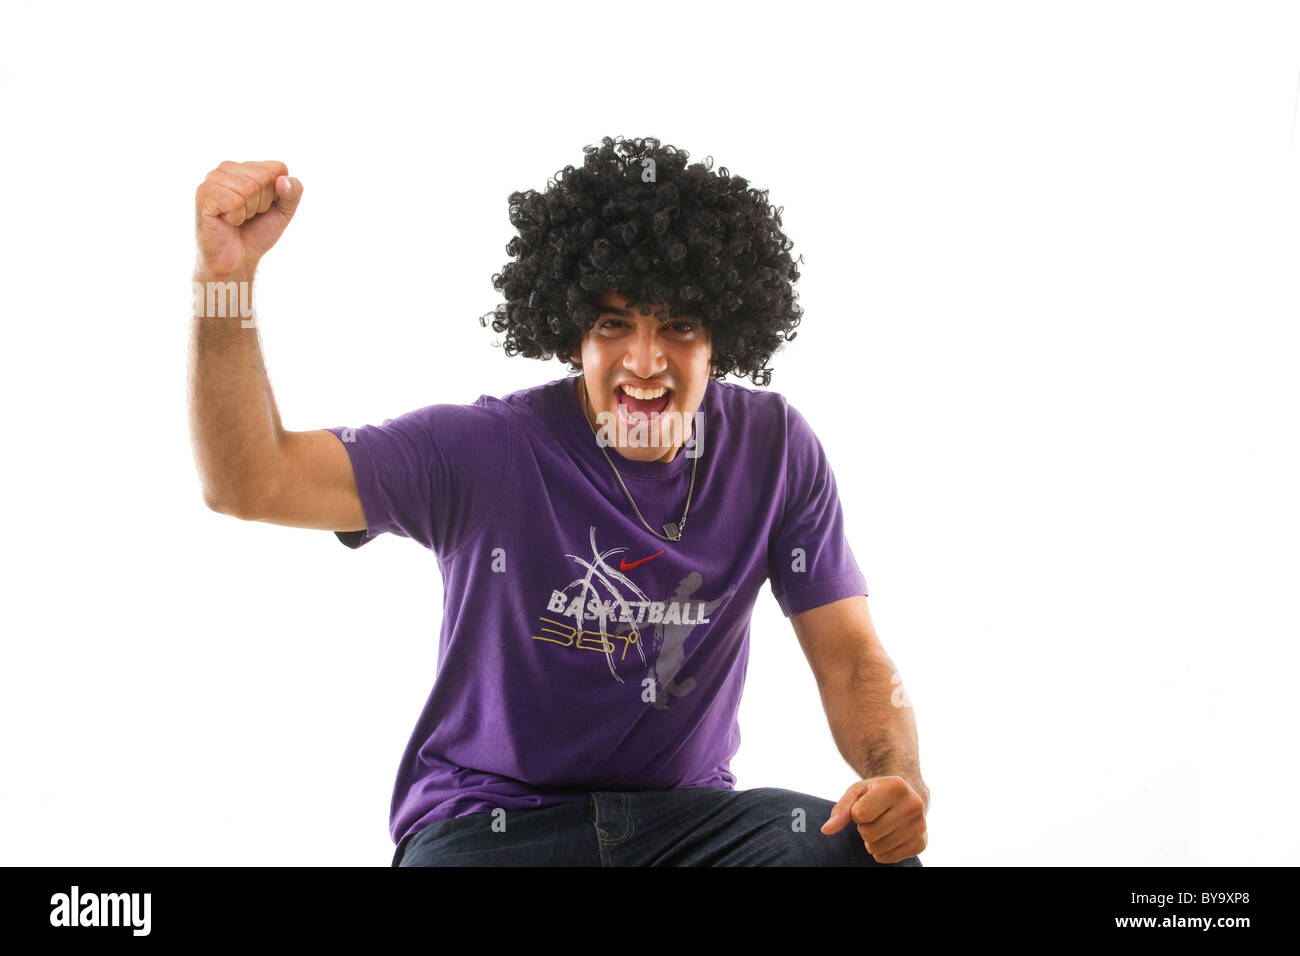 Man with an afro wig Stock Photo